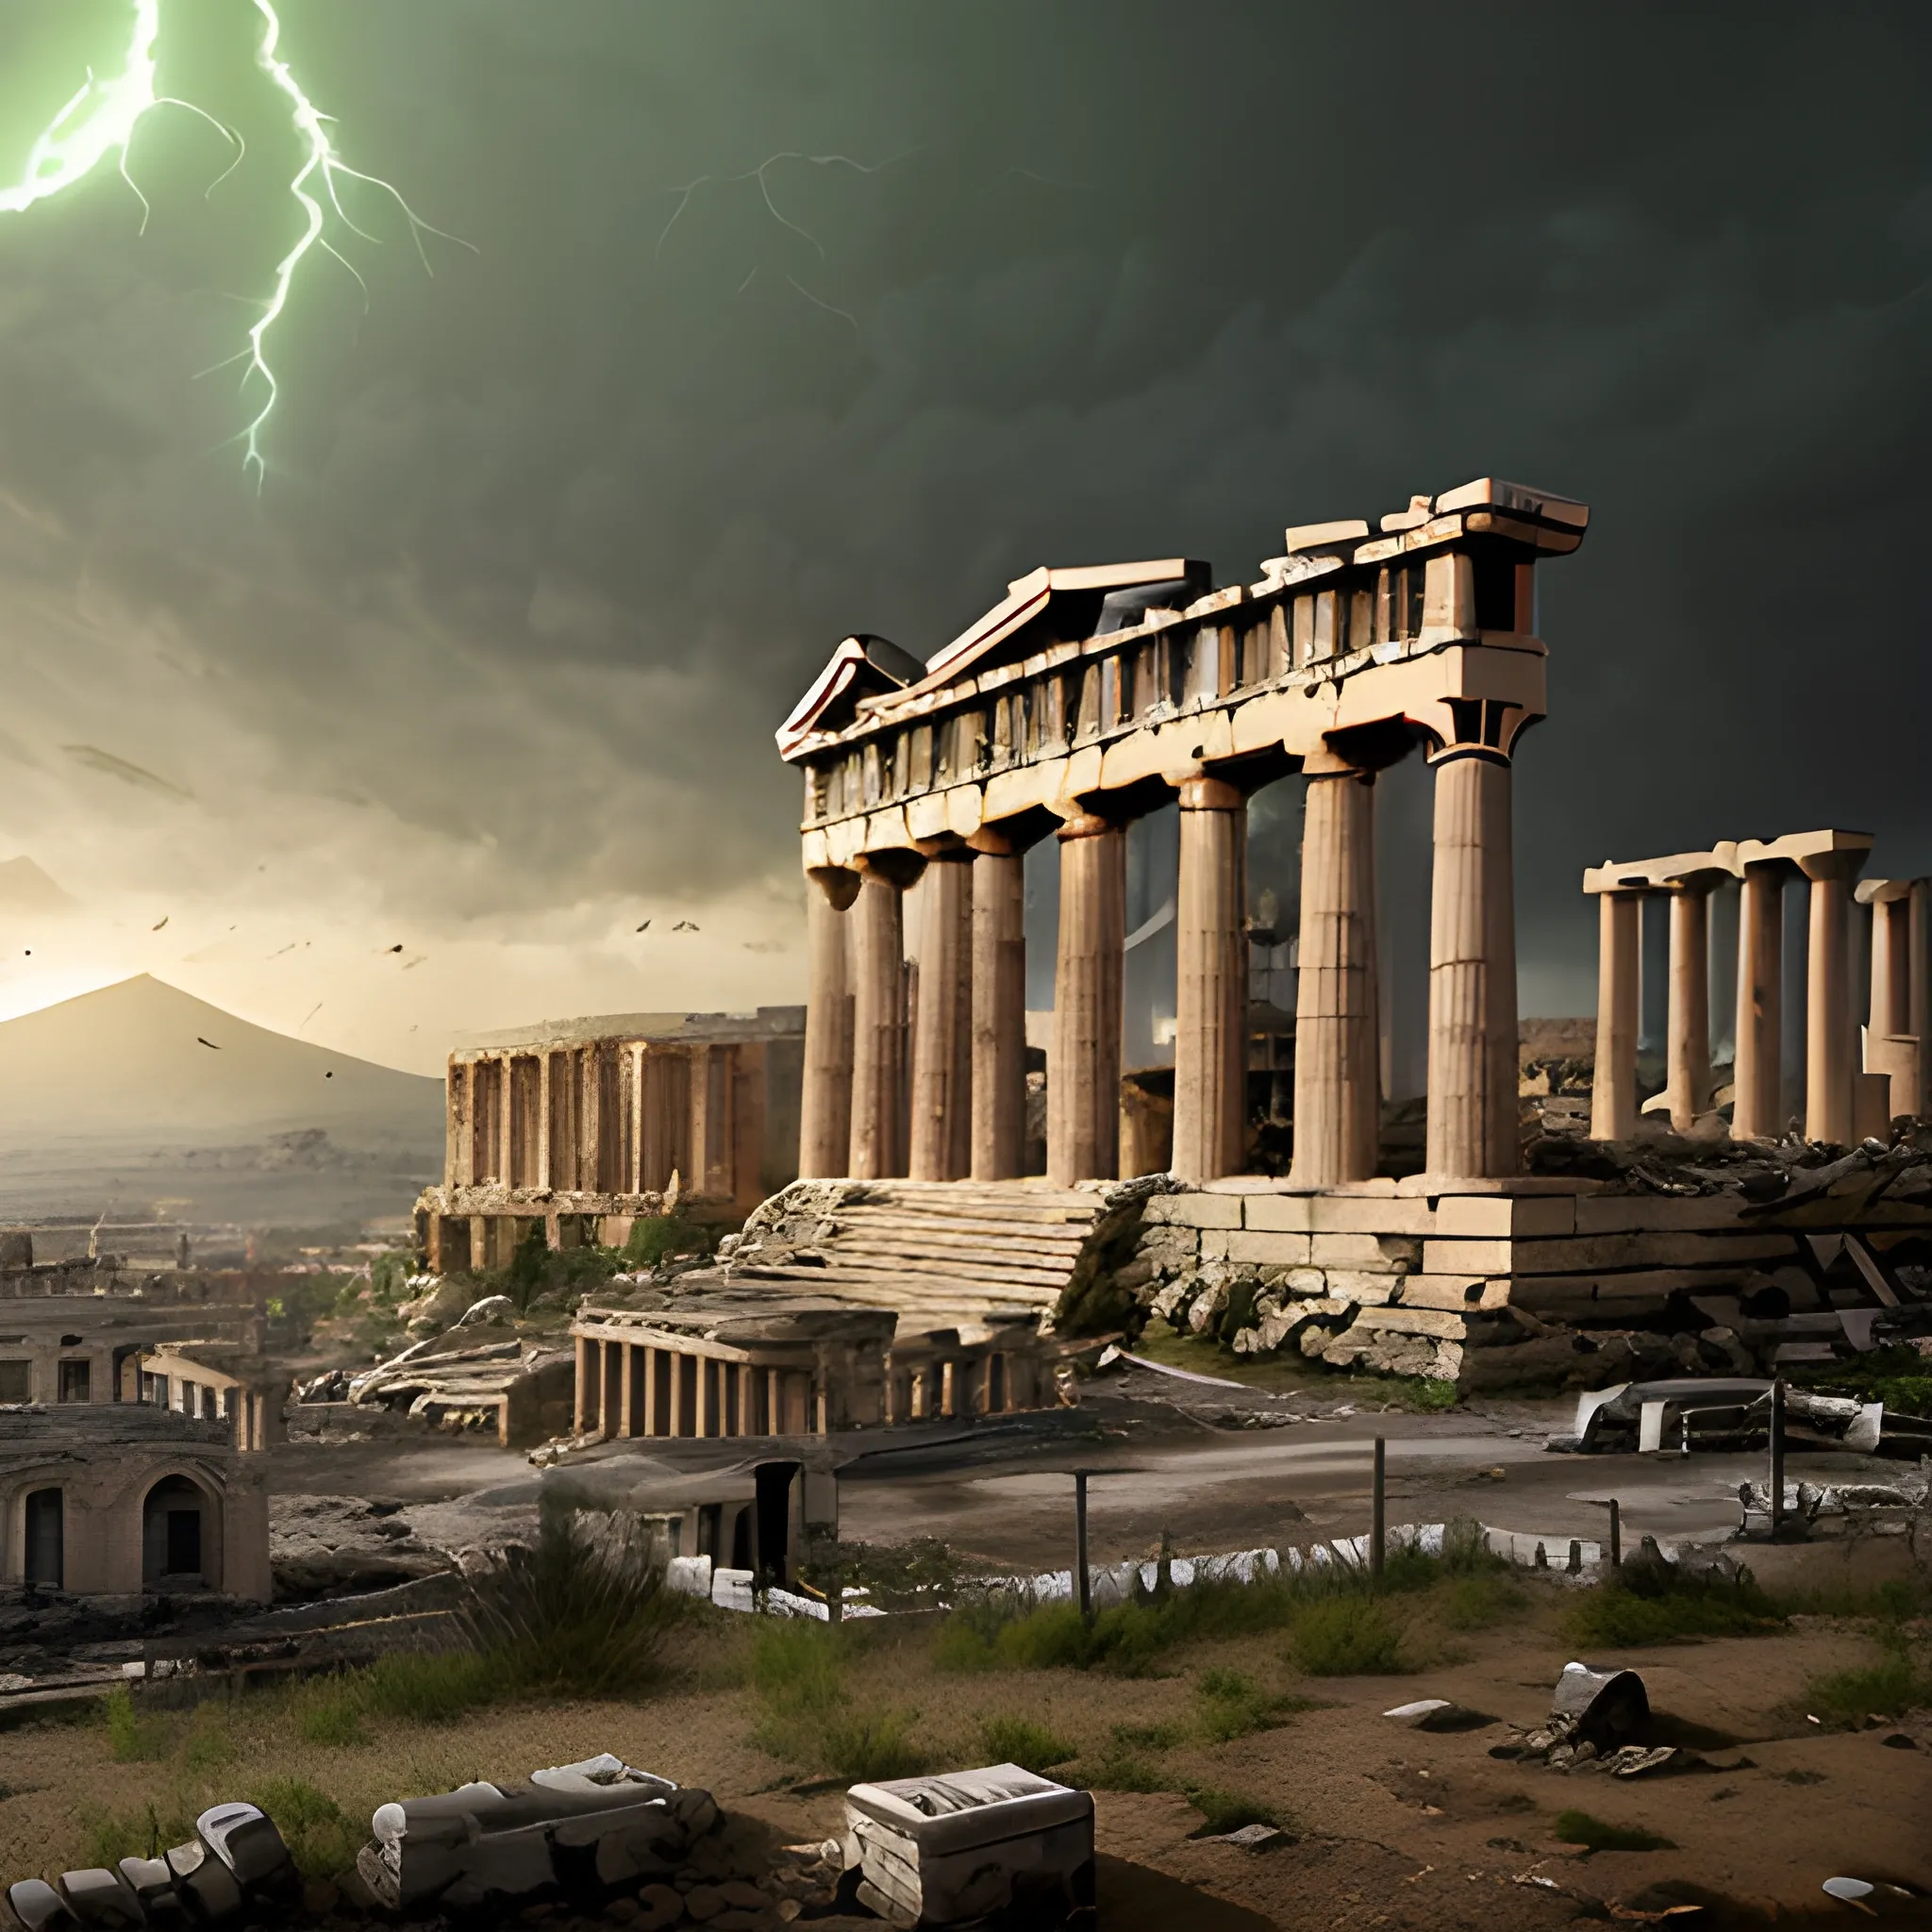 city of acropolis, on a high mountain, destroyed city, surrounded by clouds, dark environment, place of terror, dim lights, destruction, rot, night, darkness, dead vegetation, moor, rotten fauna, dry trees, burned grass, dead grass, barren plants, burned trees, rain, rainy weather, storm, strong storm, wind raising sand, rainy environment, green thunder, green lightning, dark lighting, terror, dark moon, darkness, ruins, destroyed, death, ancient greek architectural details , detailed environment, hyper realistic, destroyed city, decay, rot, 8k details, wide angle, 3D, panoramic view, Slasher style